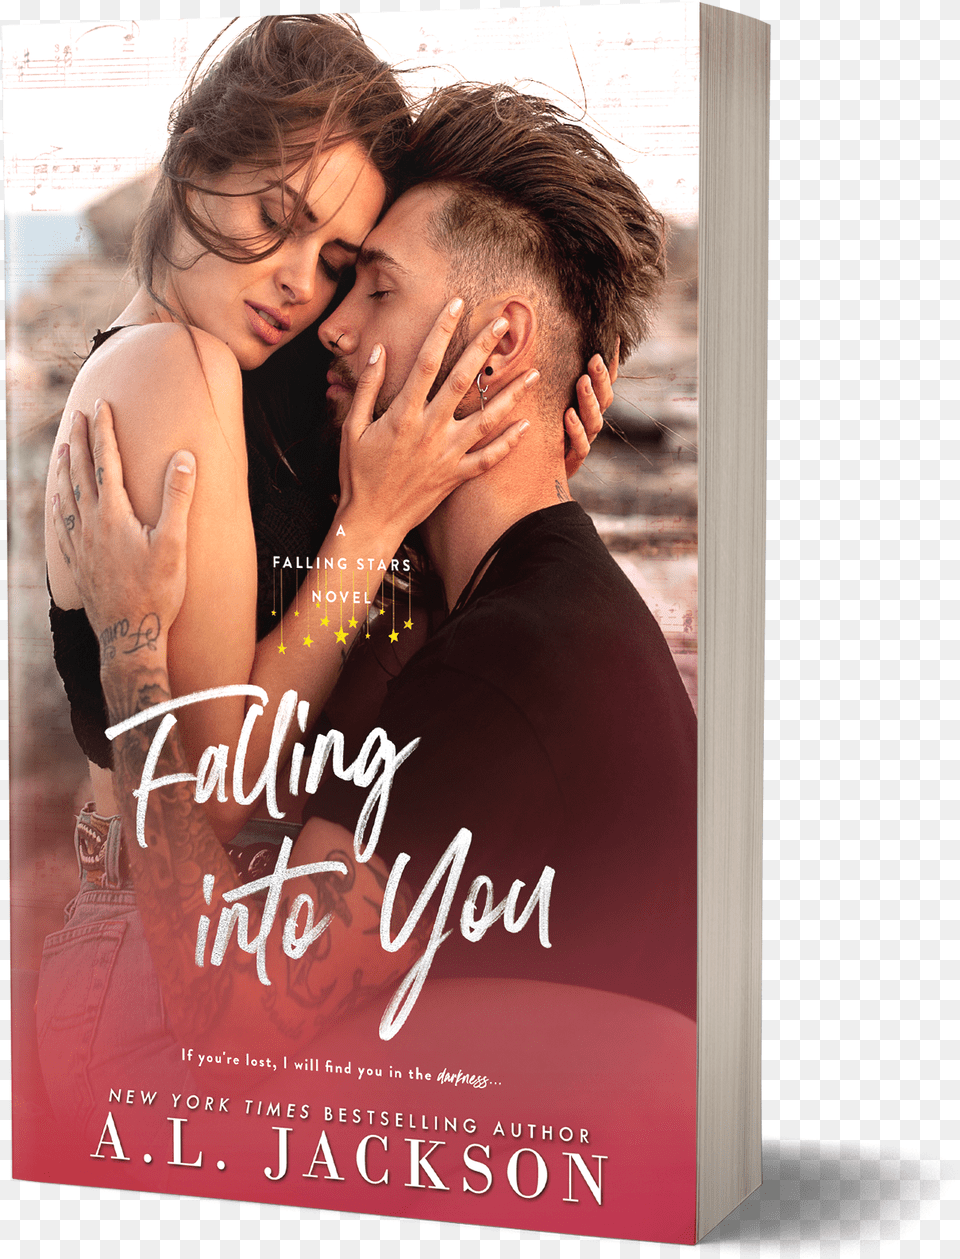 Falling Into You Paperback Falling Into You Al Jackson, Book, Publication, Adult, Female Png Image